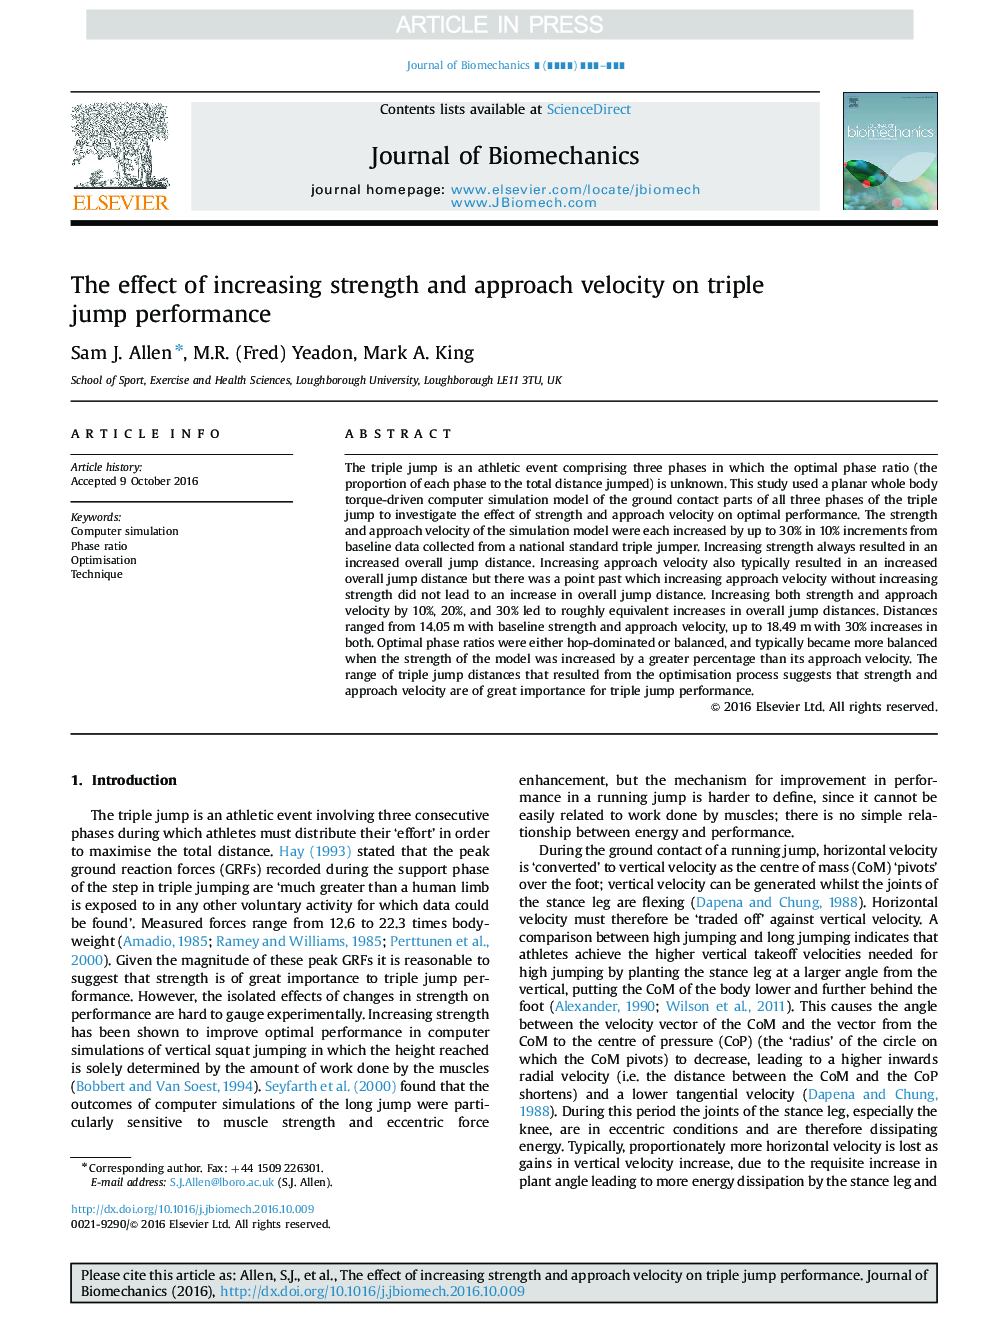 The effect of increasing strength and approach velocity on triple jump performance